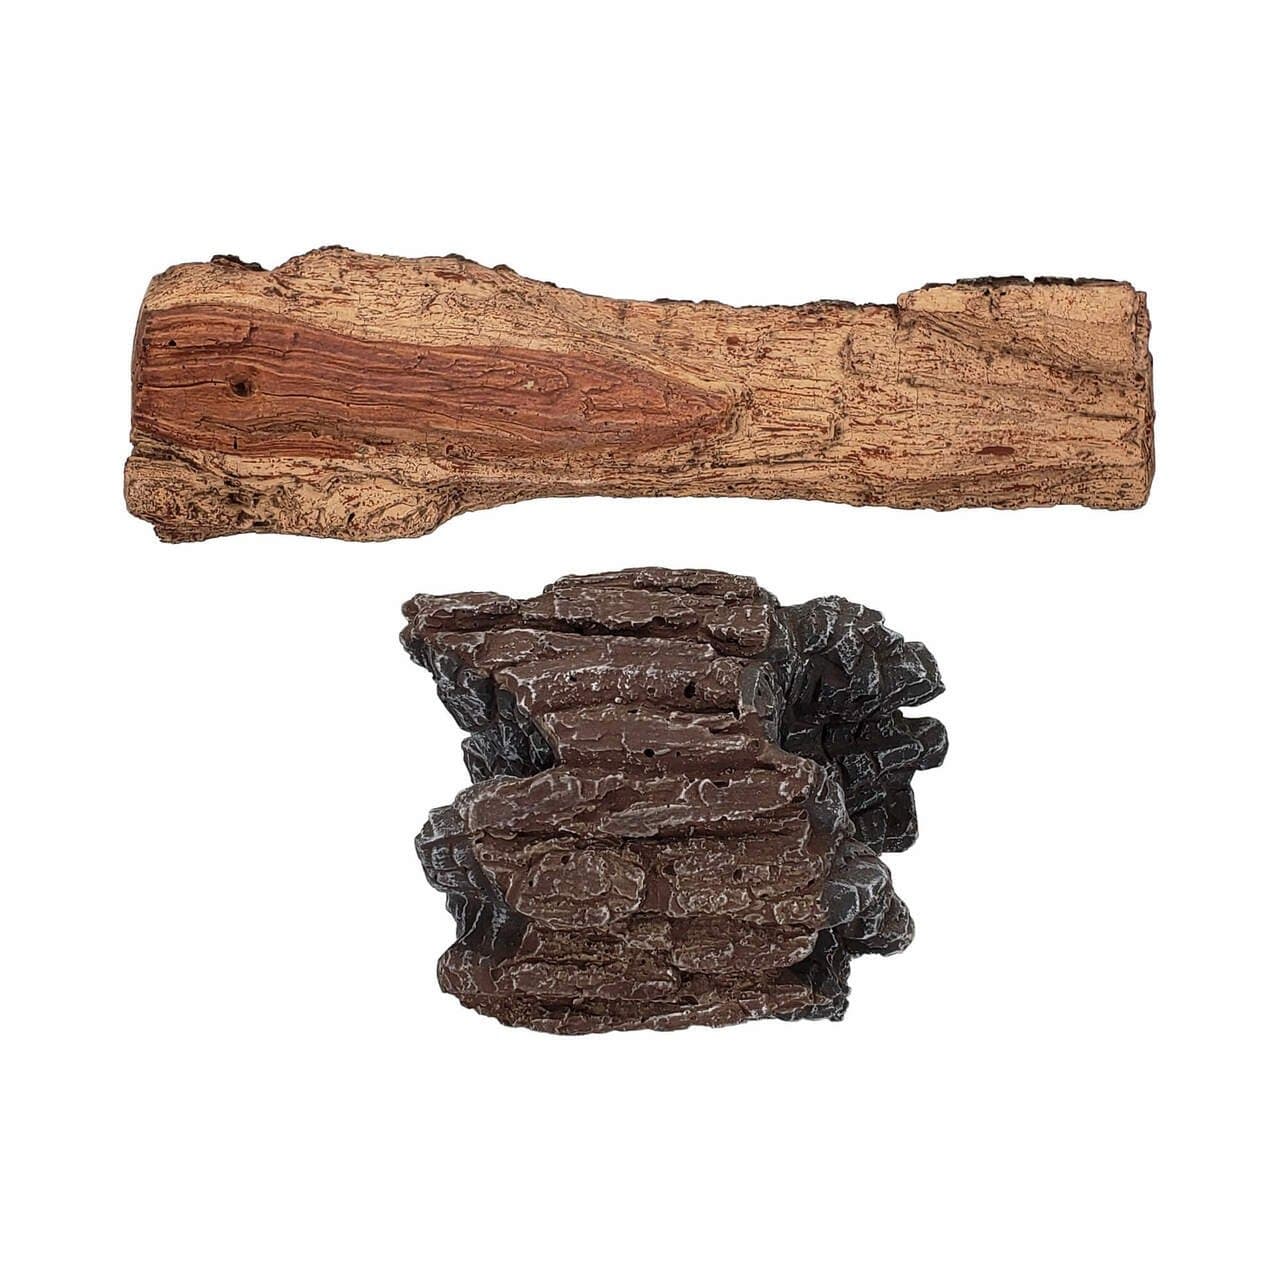 Rasmussen CHNK2 Charred Chunk Kits for Evening Series Vented Gas Log